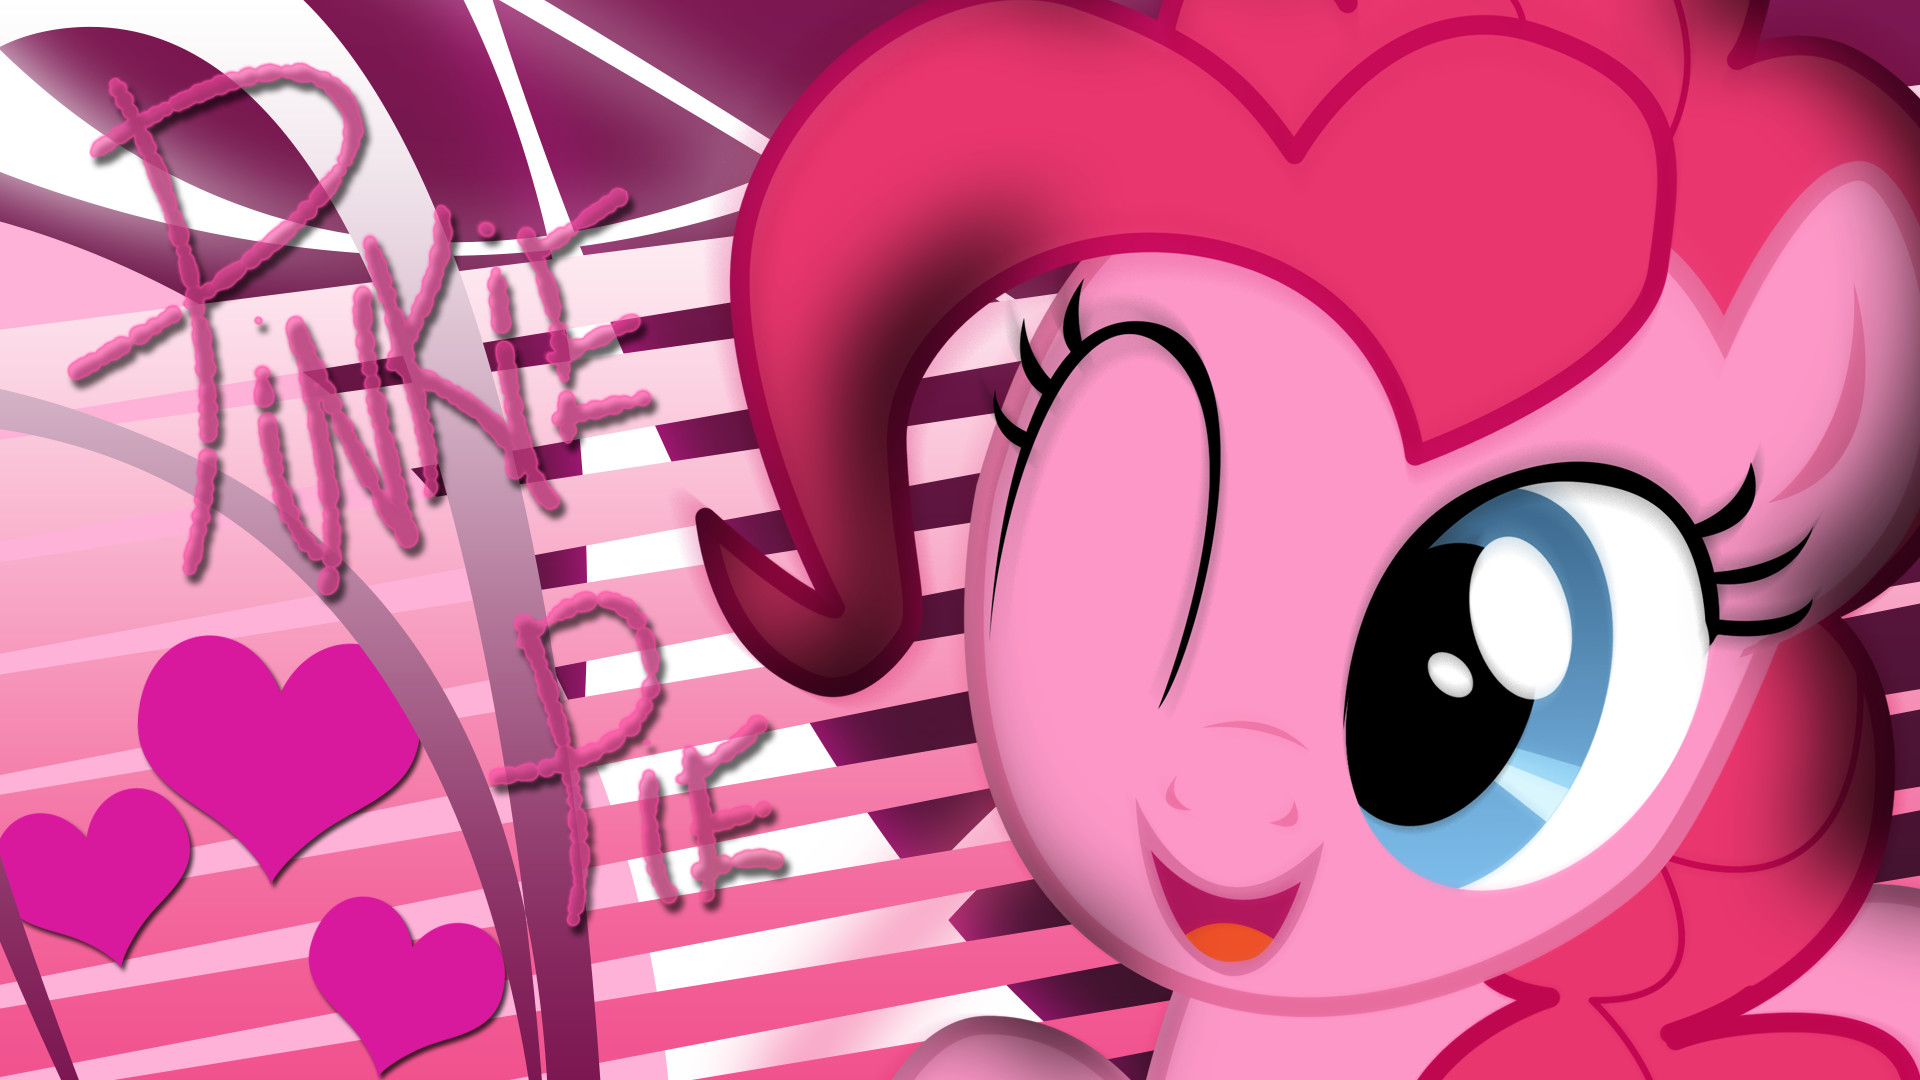 I love Pinkie Pie she is so cute and sexy xD Pinkie Pie Wallpaper Laughter